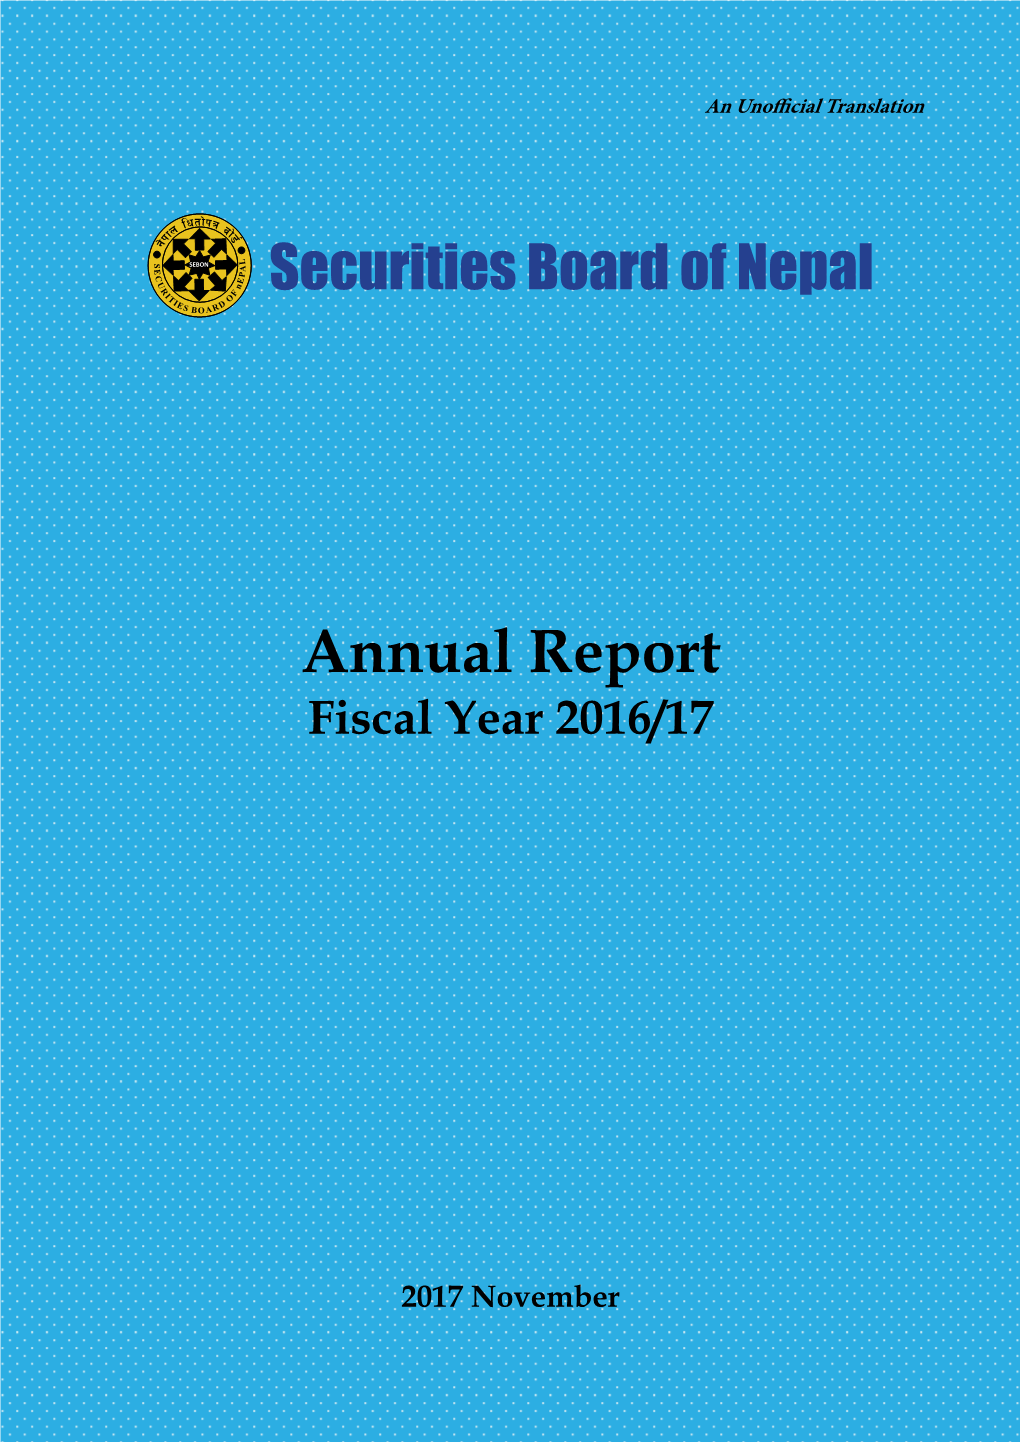 Annual Report Fiscal Year 2016/17